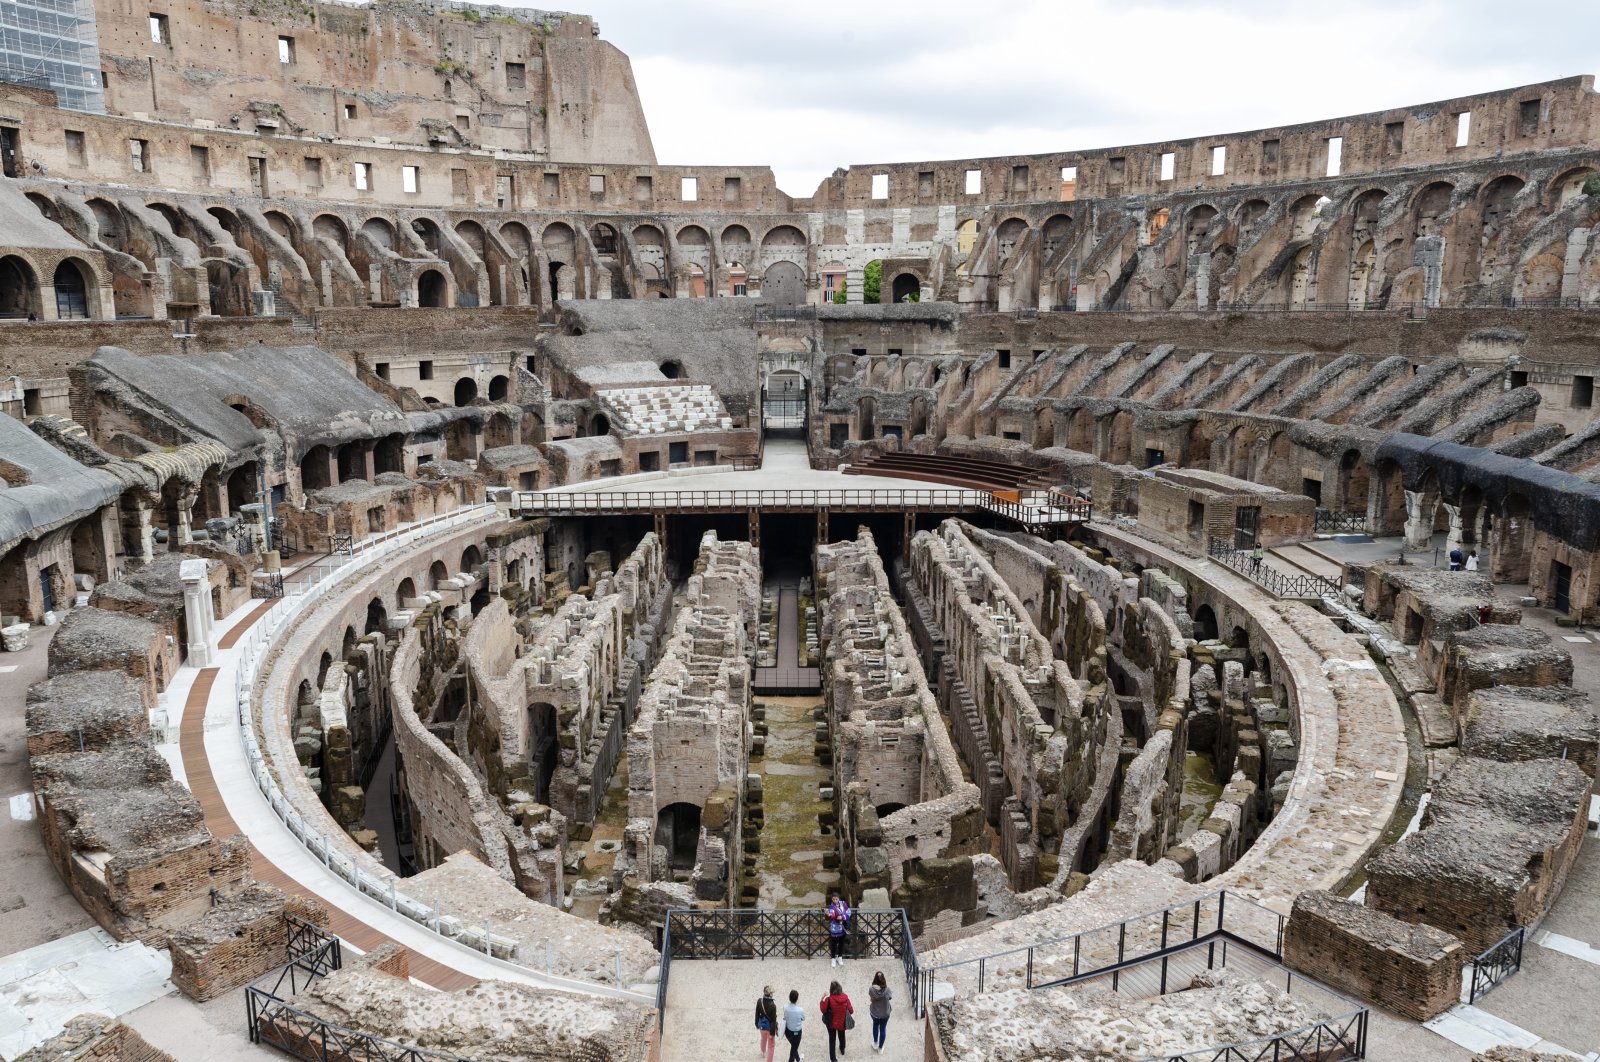 Few visitors arrive for their tour of the ancient Colosseum, in Rome, April 26, 2021. (AP Photo)